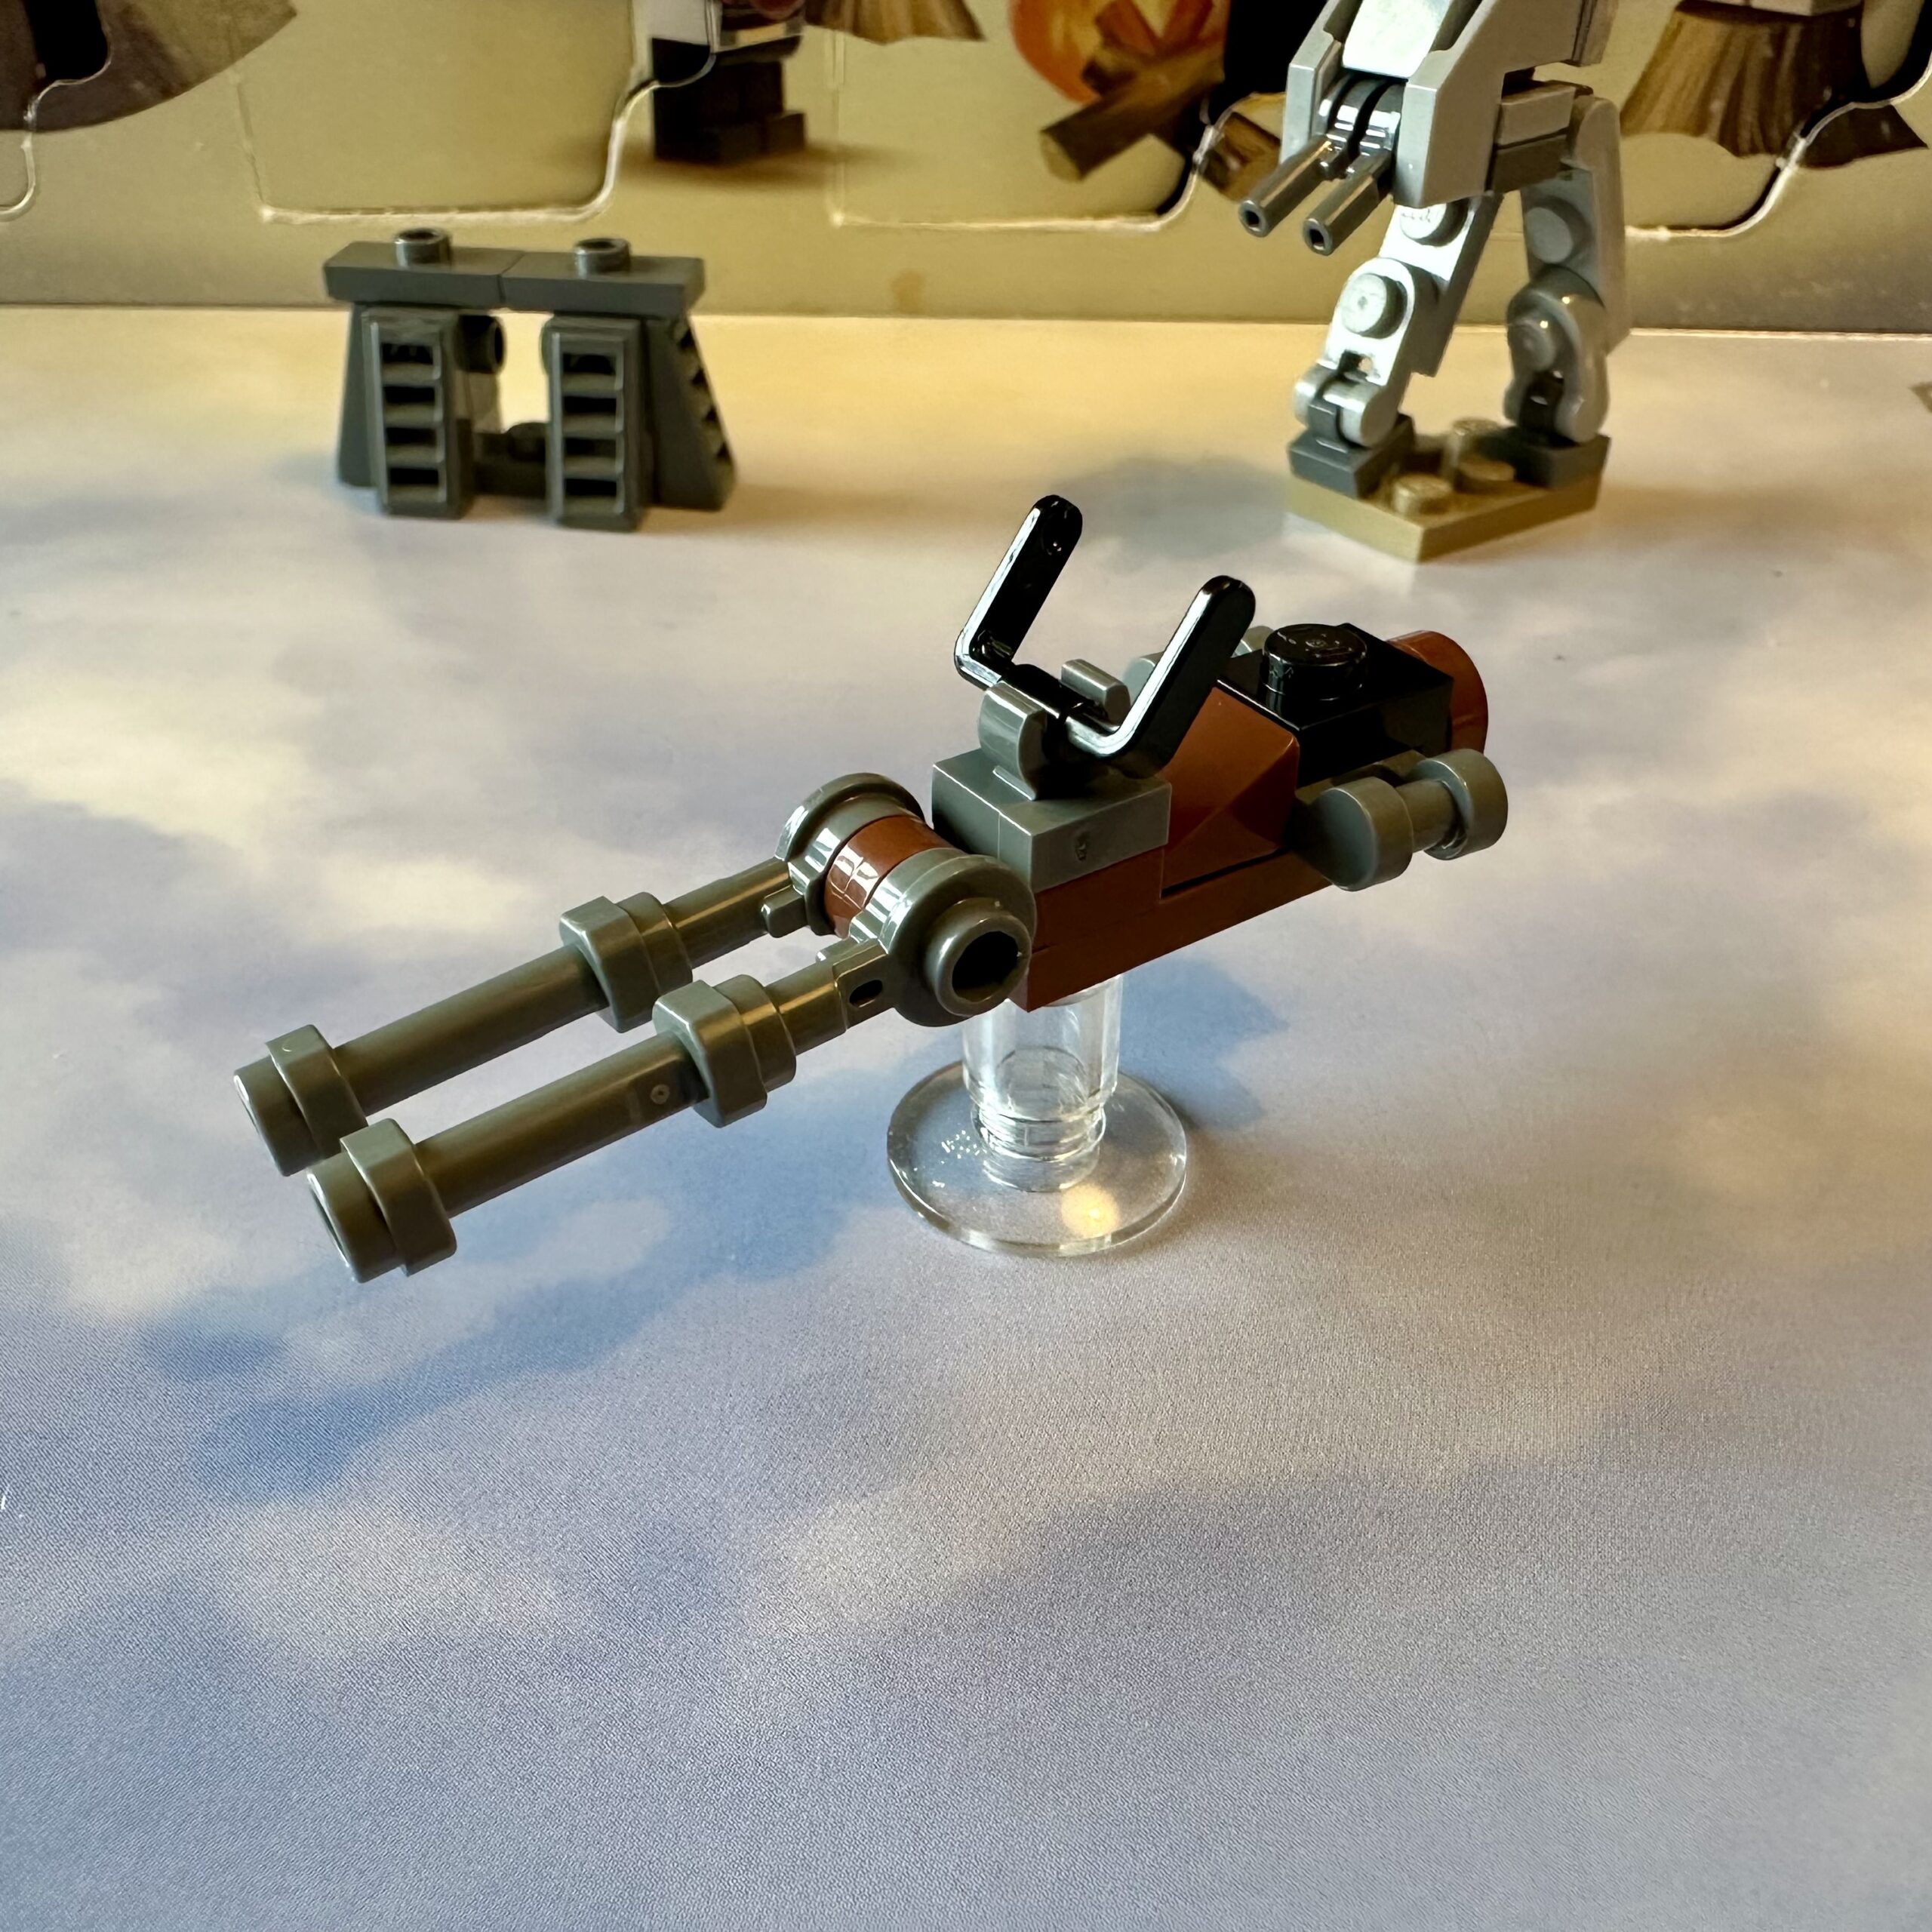 LEGO micro-build of an Imperial Speeder Bike mostly done in brown and dark gray.